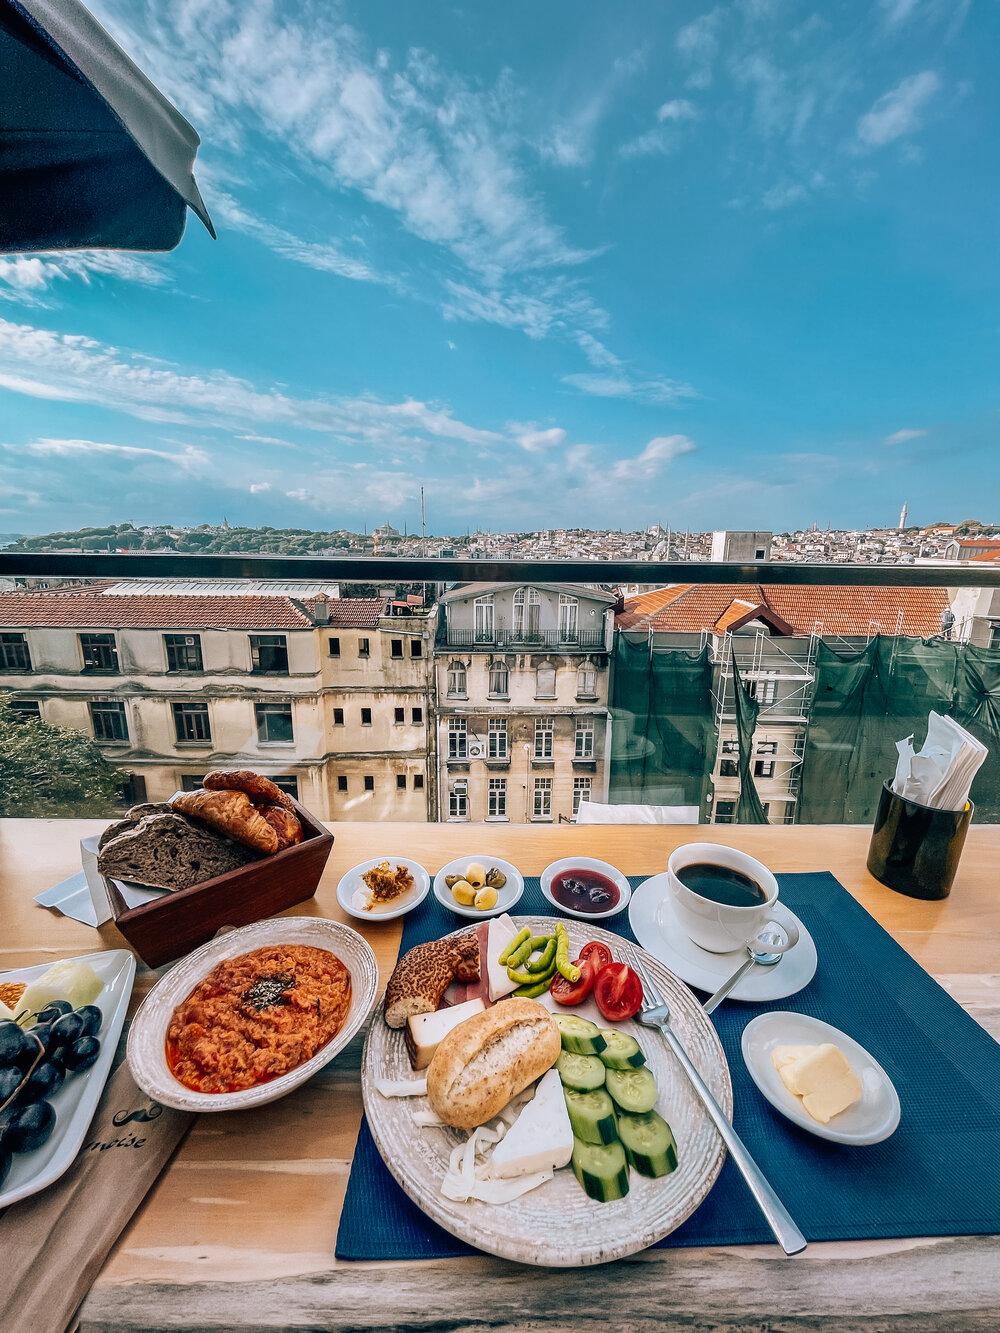 Where to stay in Istanbul - Hotel DeCamondo